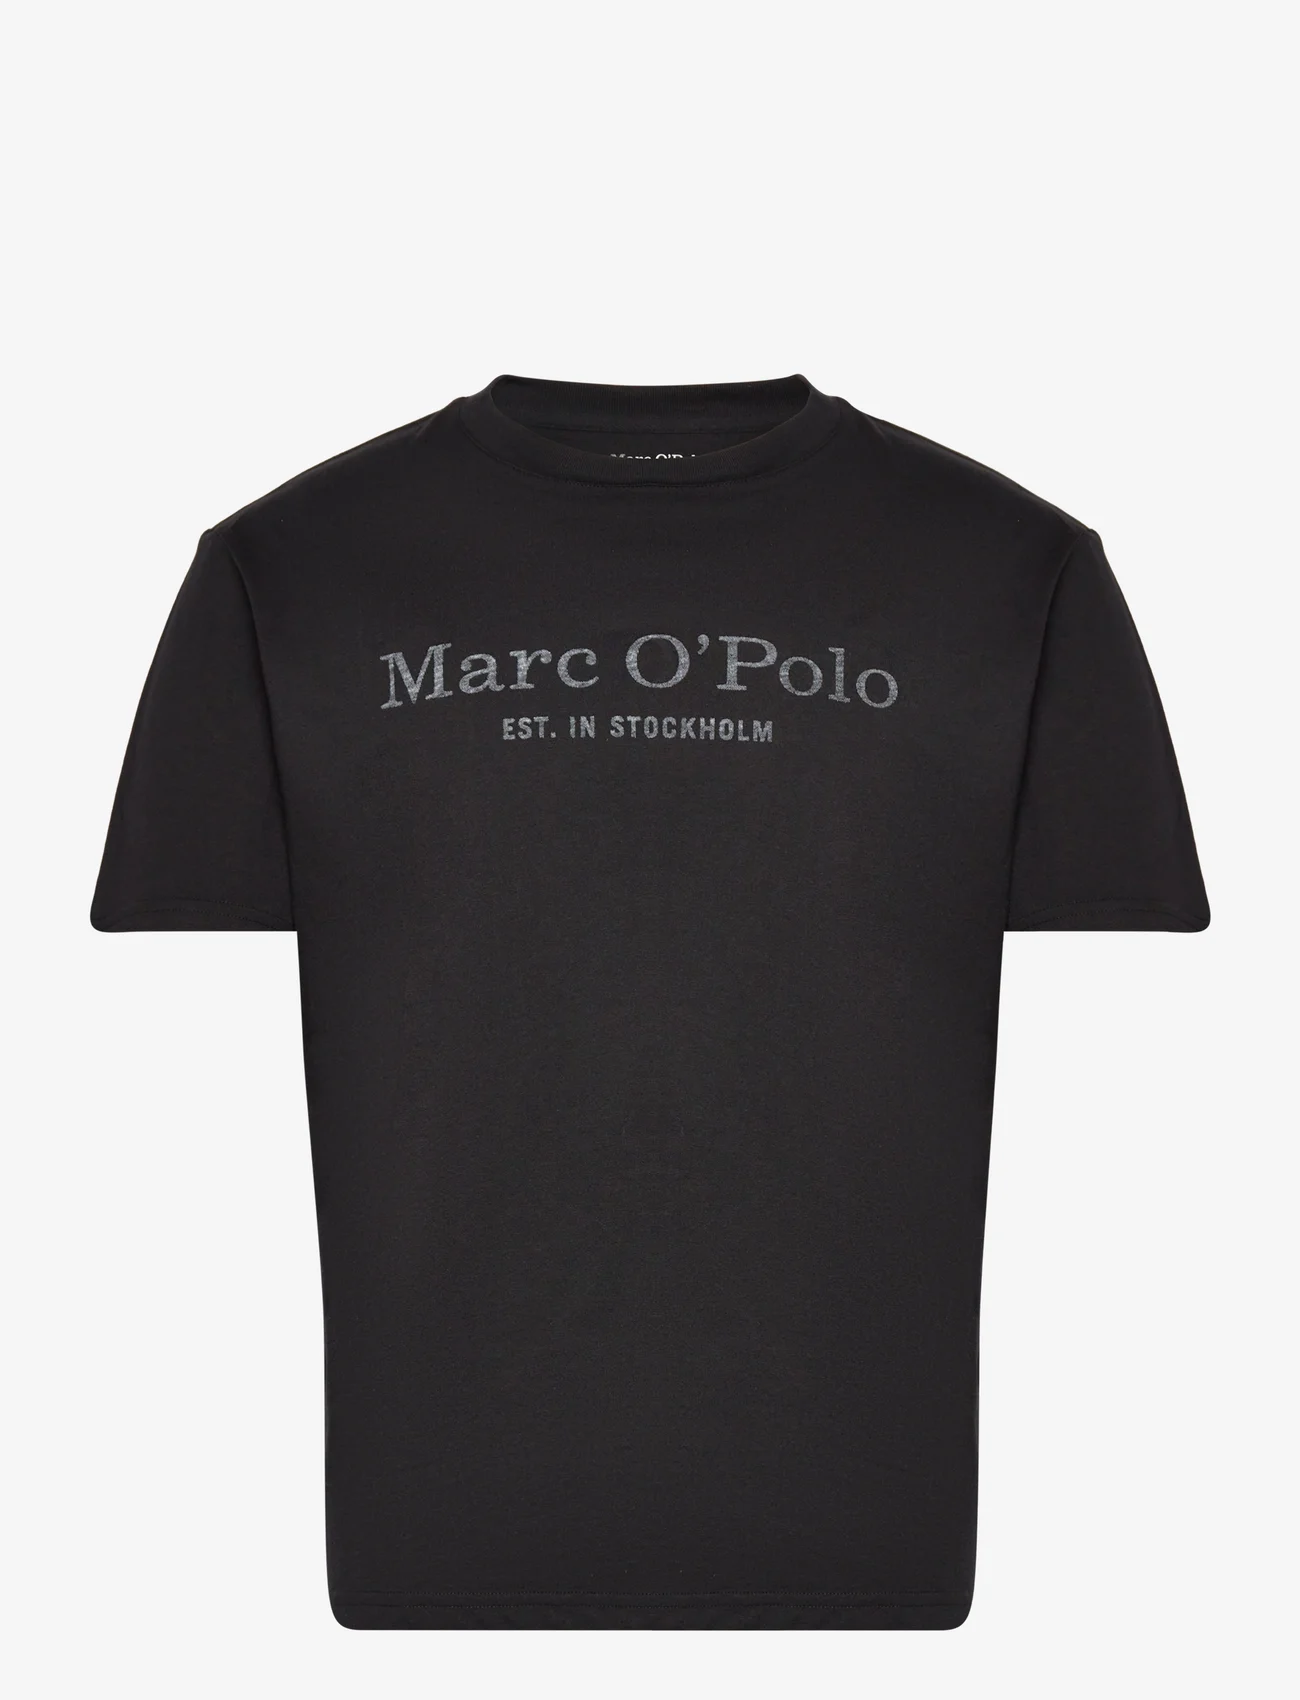 Marc O'Polo - T-SHIRTS SHORT SLEEVE - lowest prices - black - 0